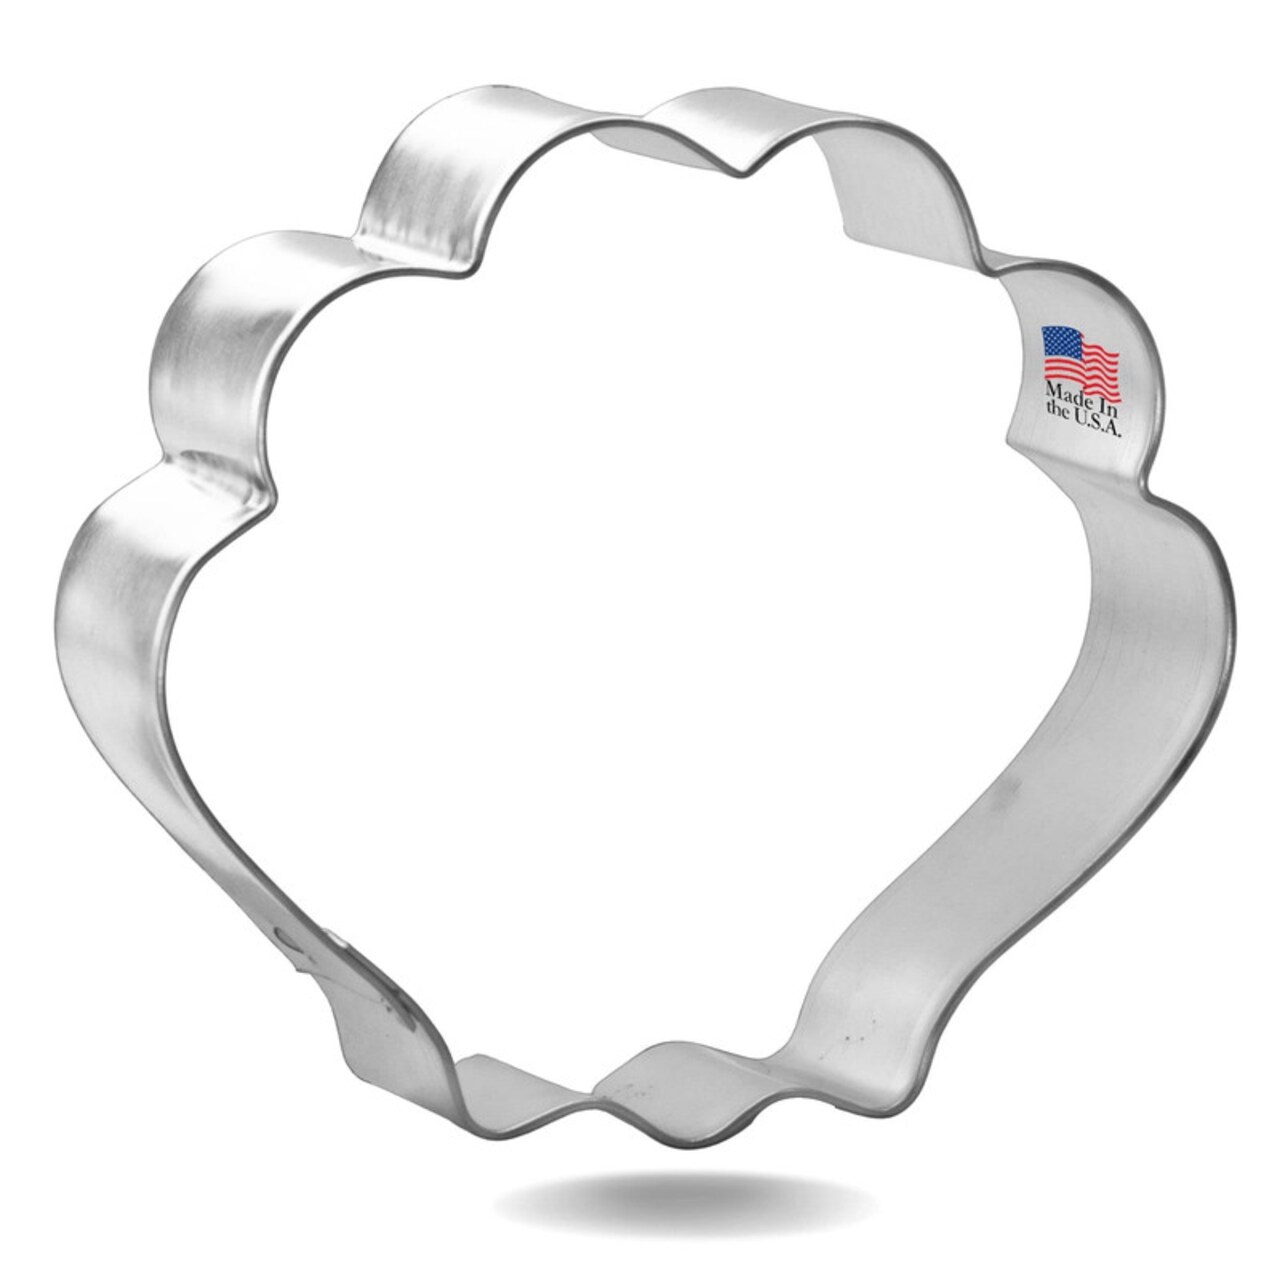 Seashell Cookie Cutter 3.75 in, CookieCutter.com, Tin Plated Steel, Handmade in the USA